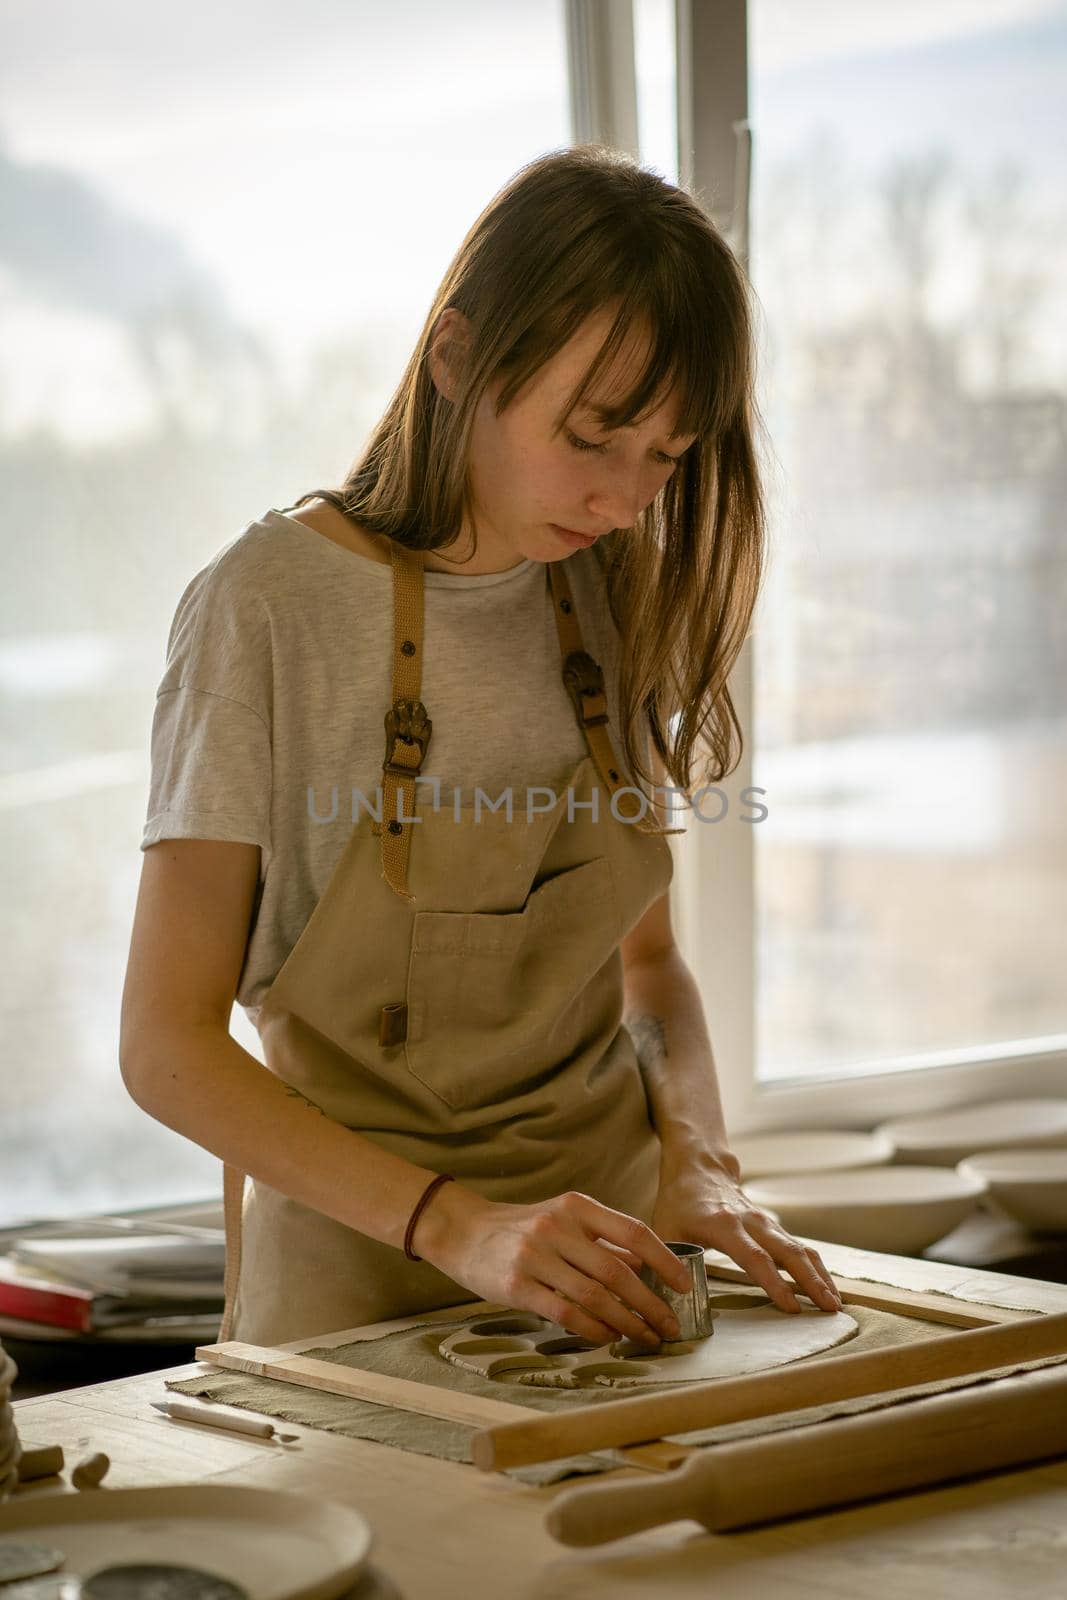 Beautiful young woman making ceramic ware, molding a shape in workplace in sun light. Concept for woman in freelance, business, hobby